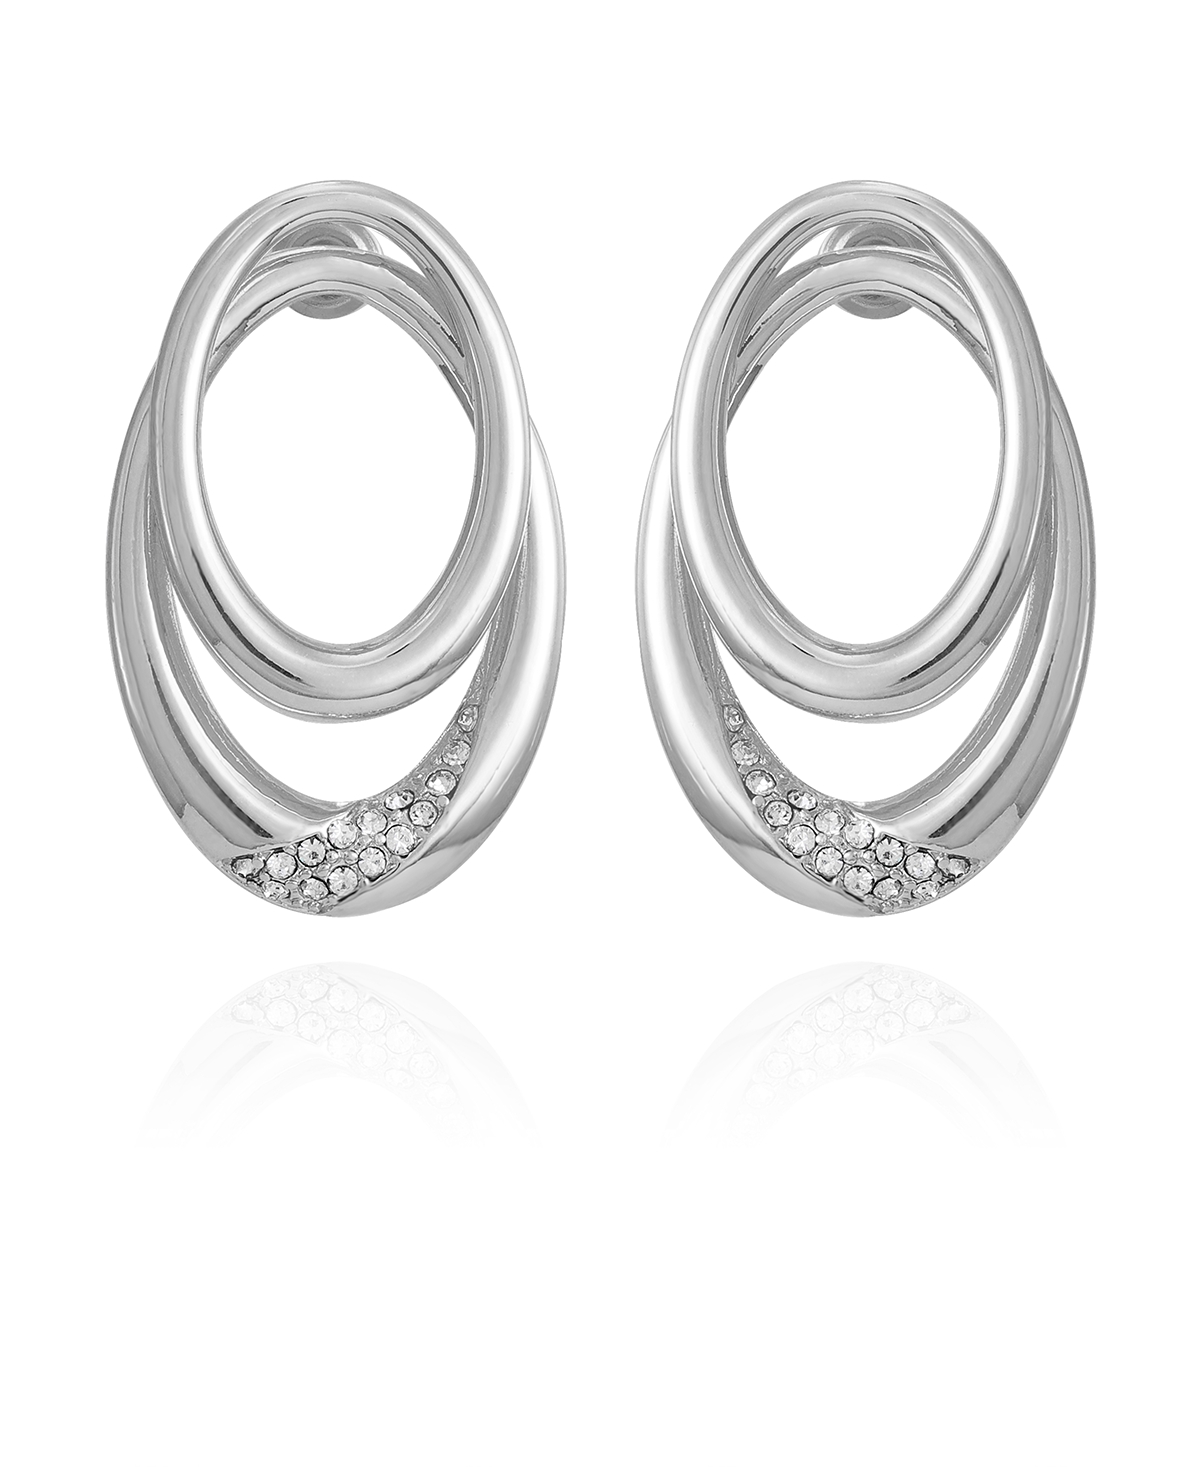 Vince Camuto Silver-tone Glass Stone Double Hoop Earrings